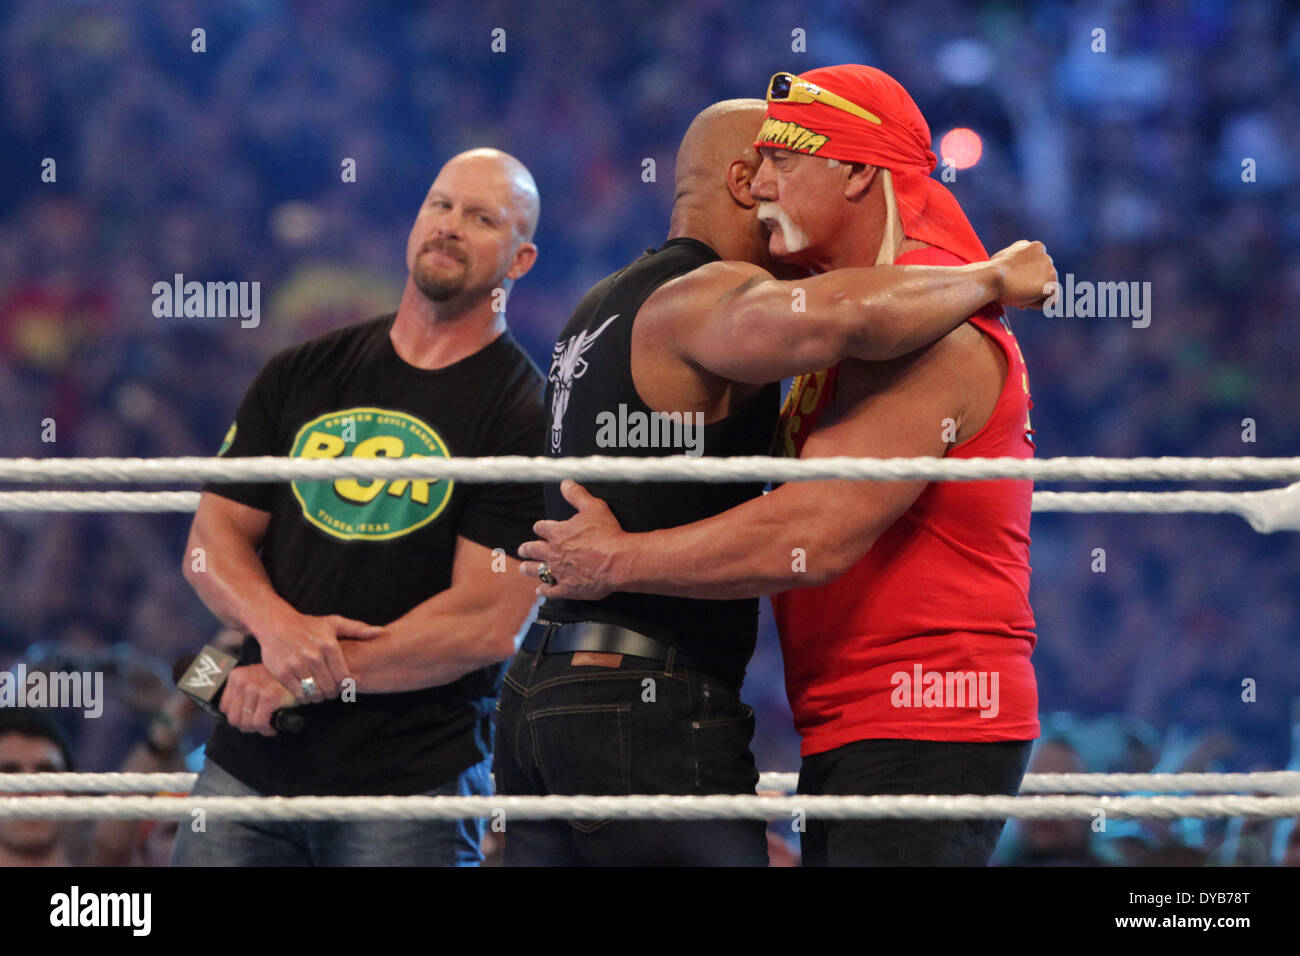 New Orleans, Louisiana, USA. 6th Apr, 2014. Wrestling icon and actor THE  ROCK hugs HULK HOGAN as Steve Austin looks on. All three legends surprised  the fans by returning during Wrestlemaniaat the